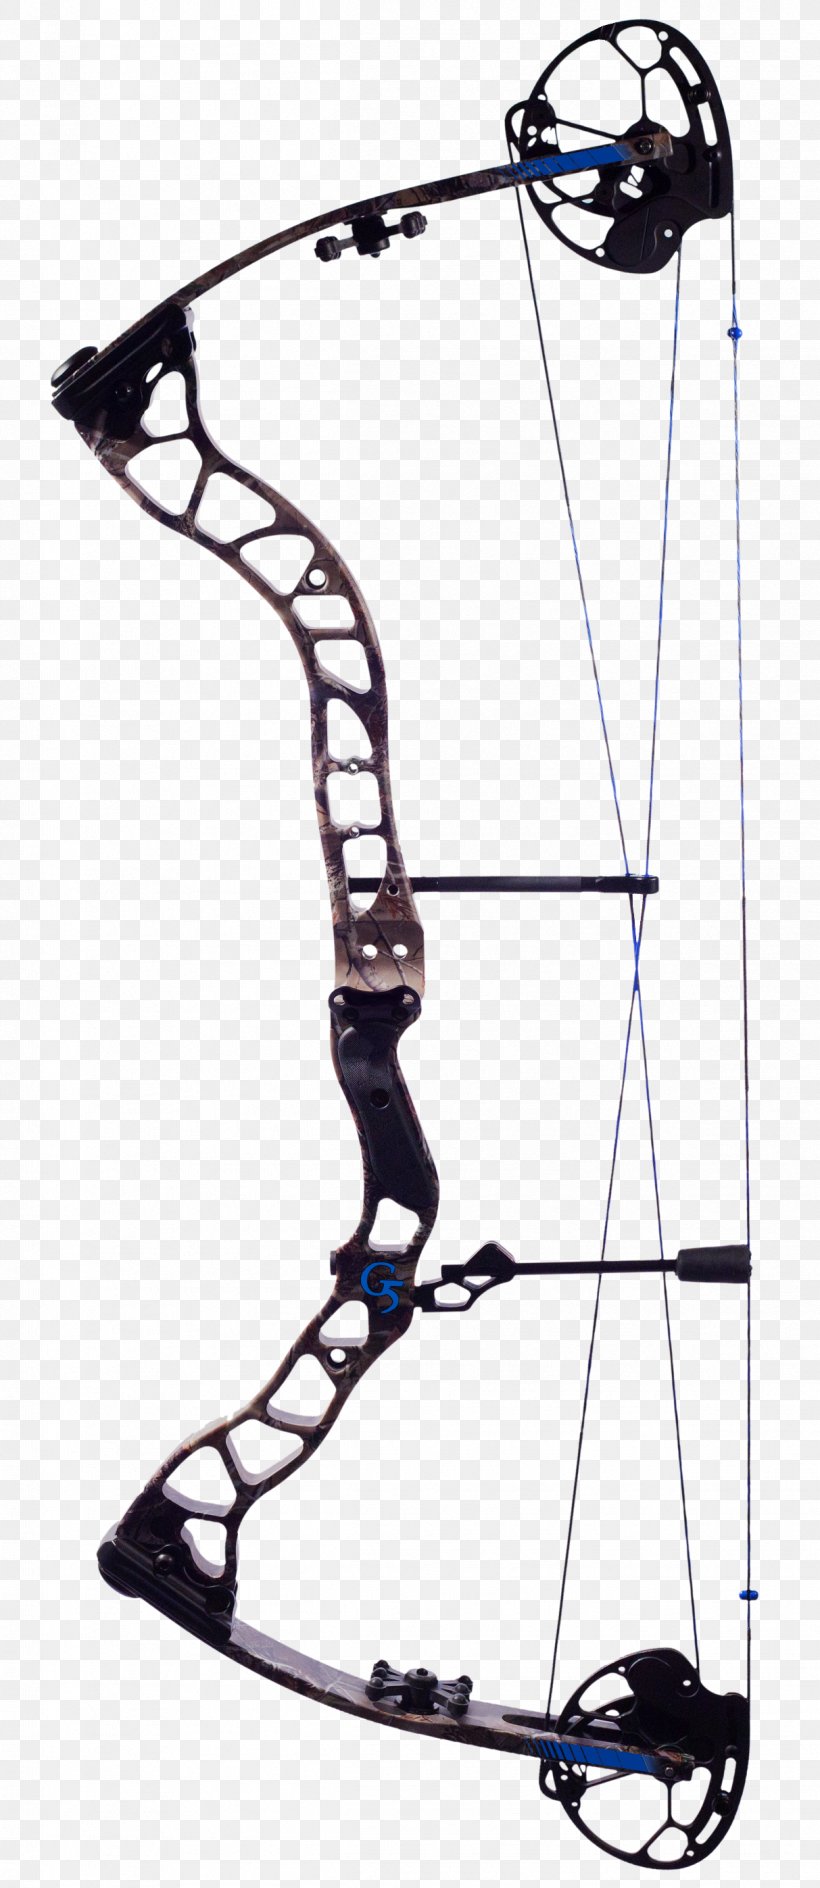 Compound Bows Bow And Arrow Archery Hunting, PNG, 1213x2794px, Compound Bows, Archery, Bow, Bow And Arrow, Bowhunting Download Free